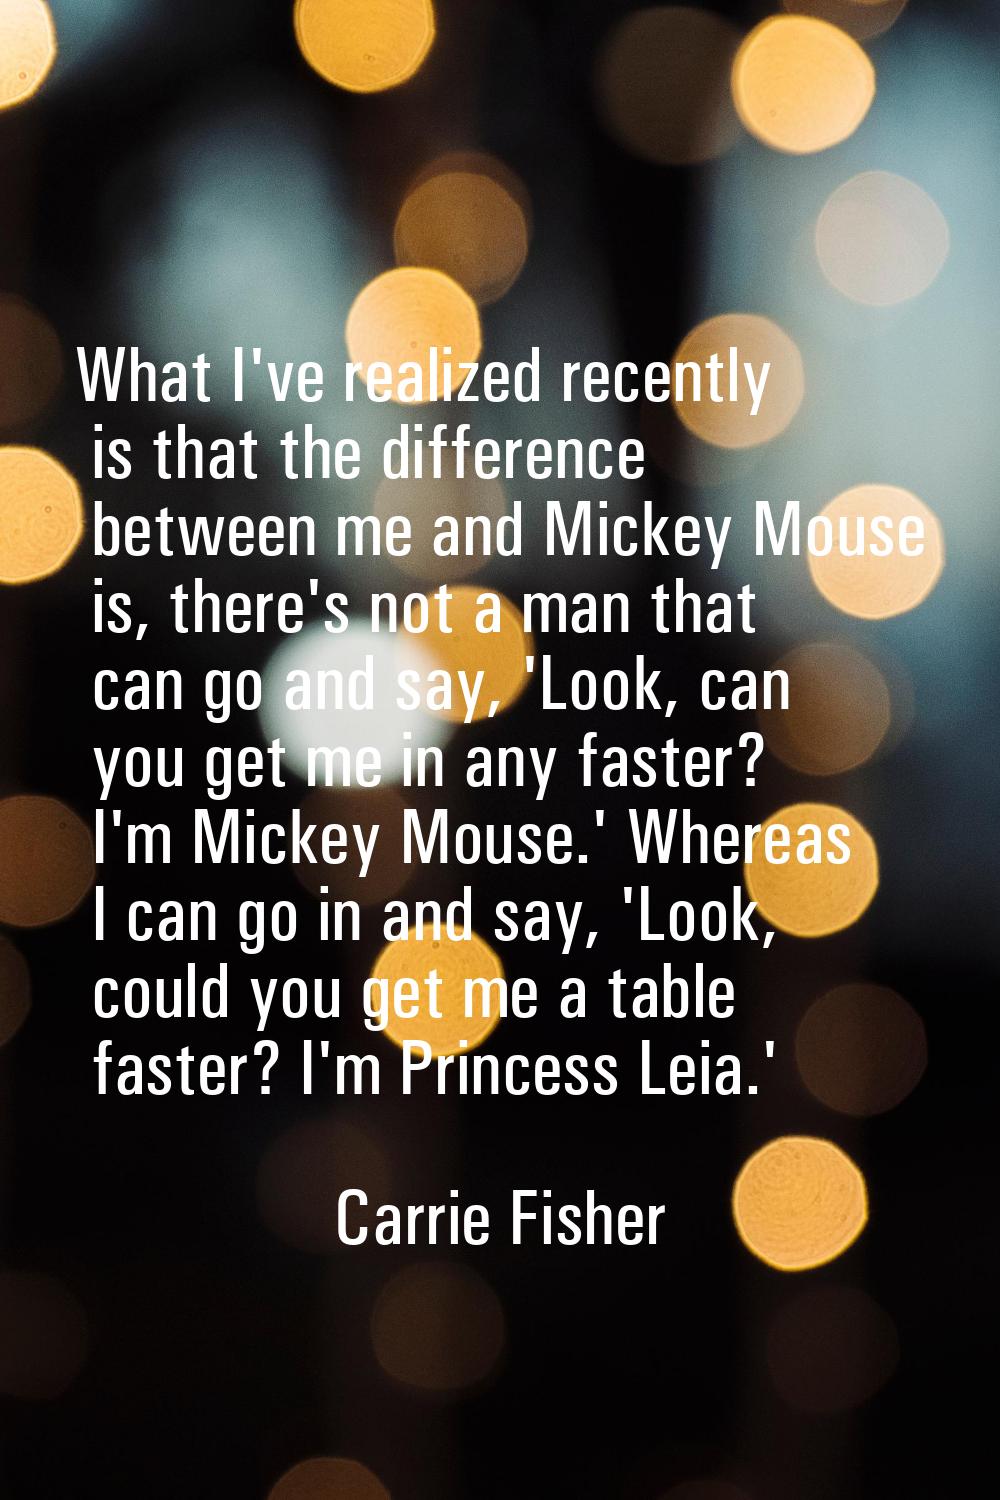 What I've realized recently is that the difference between me and Mickey Mouse is, there's not a ma